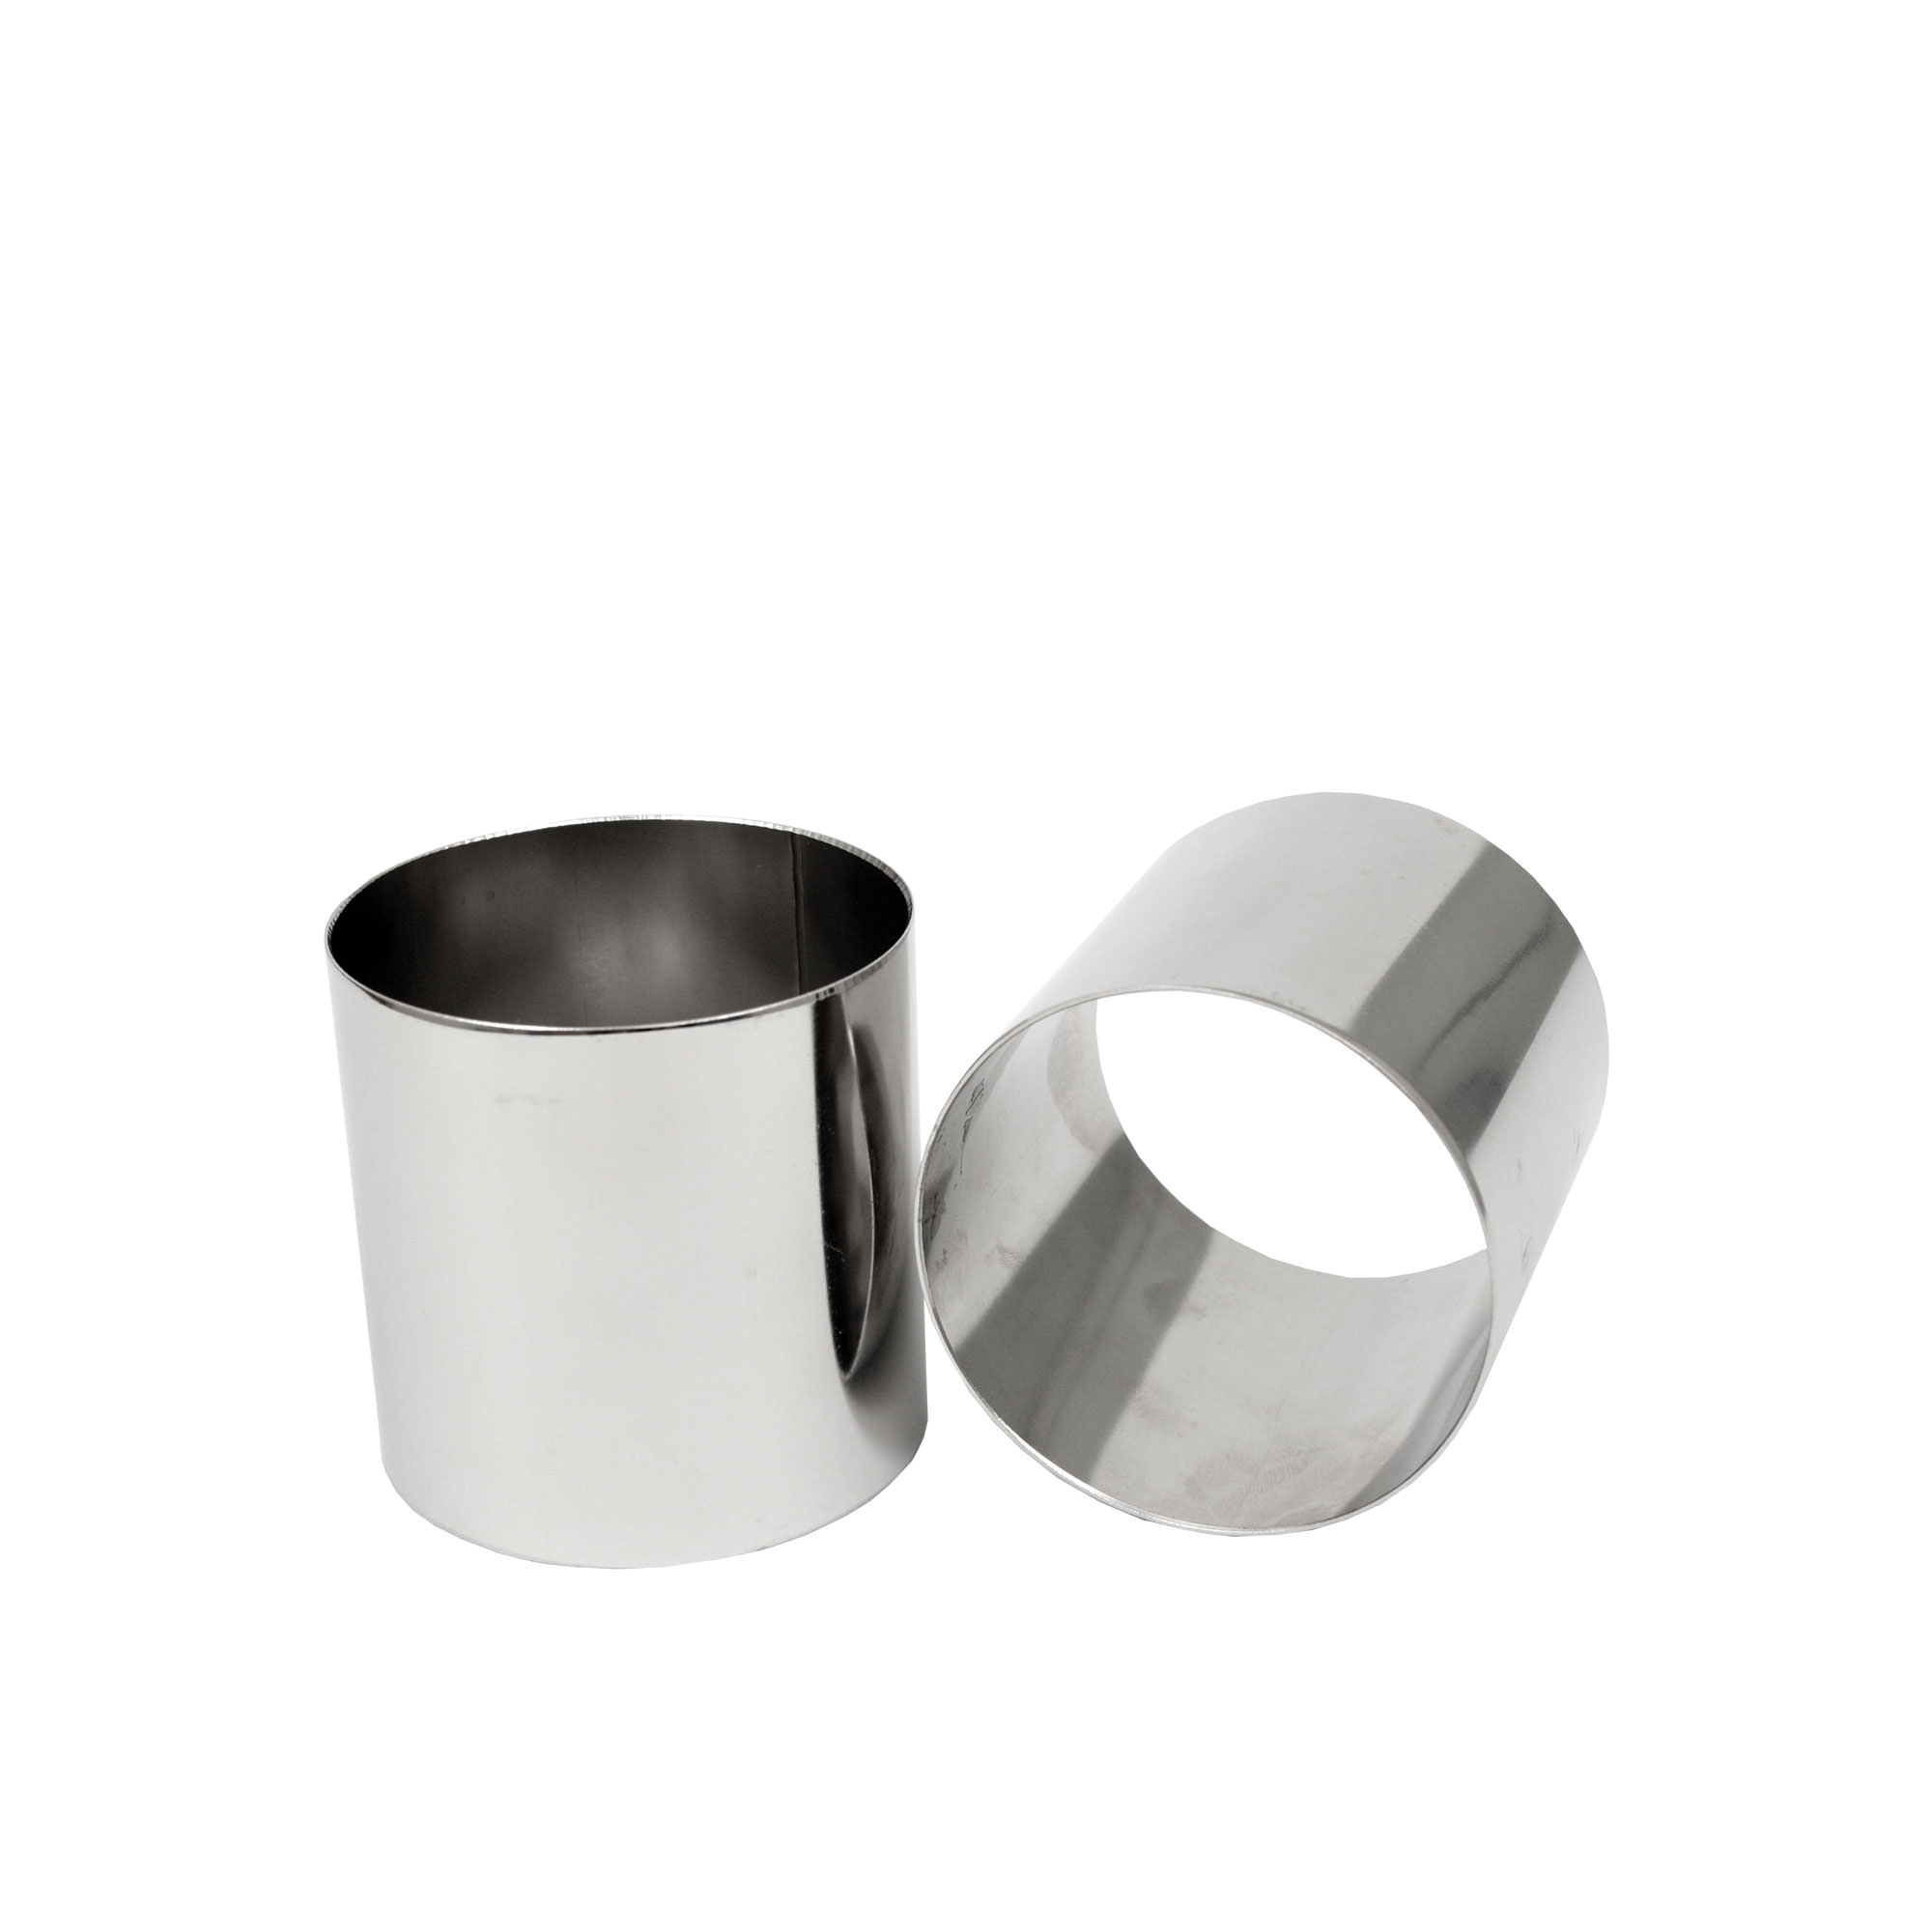 Appetito Stainless Steel Food Ring 7.5cm Image 2